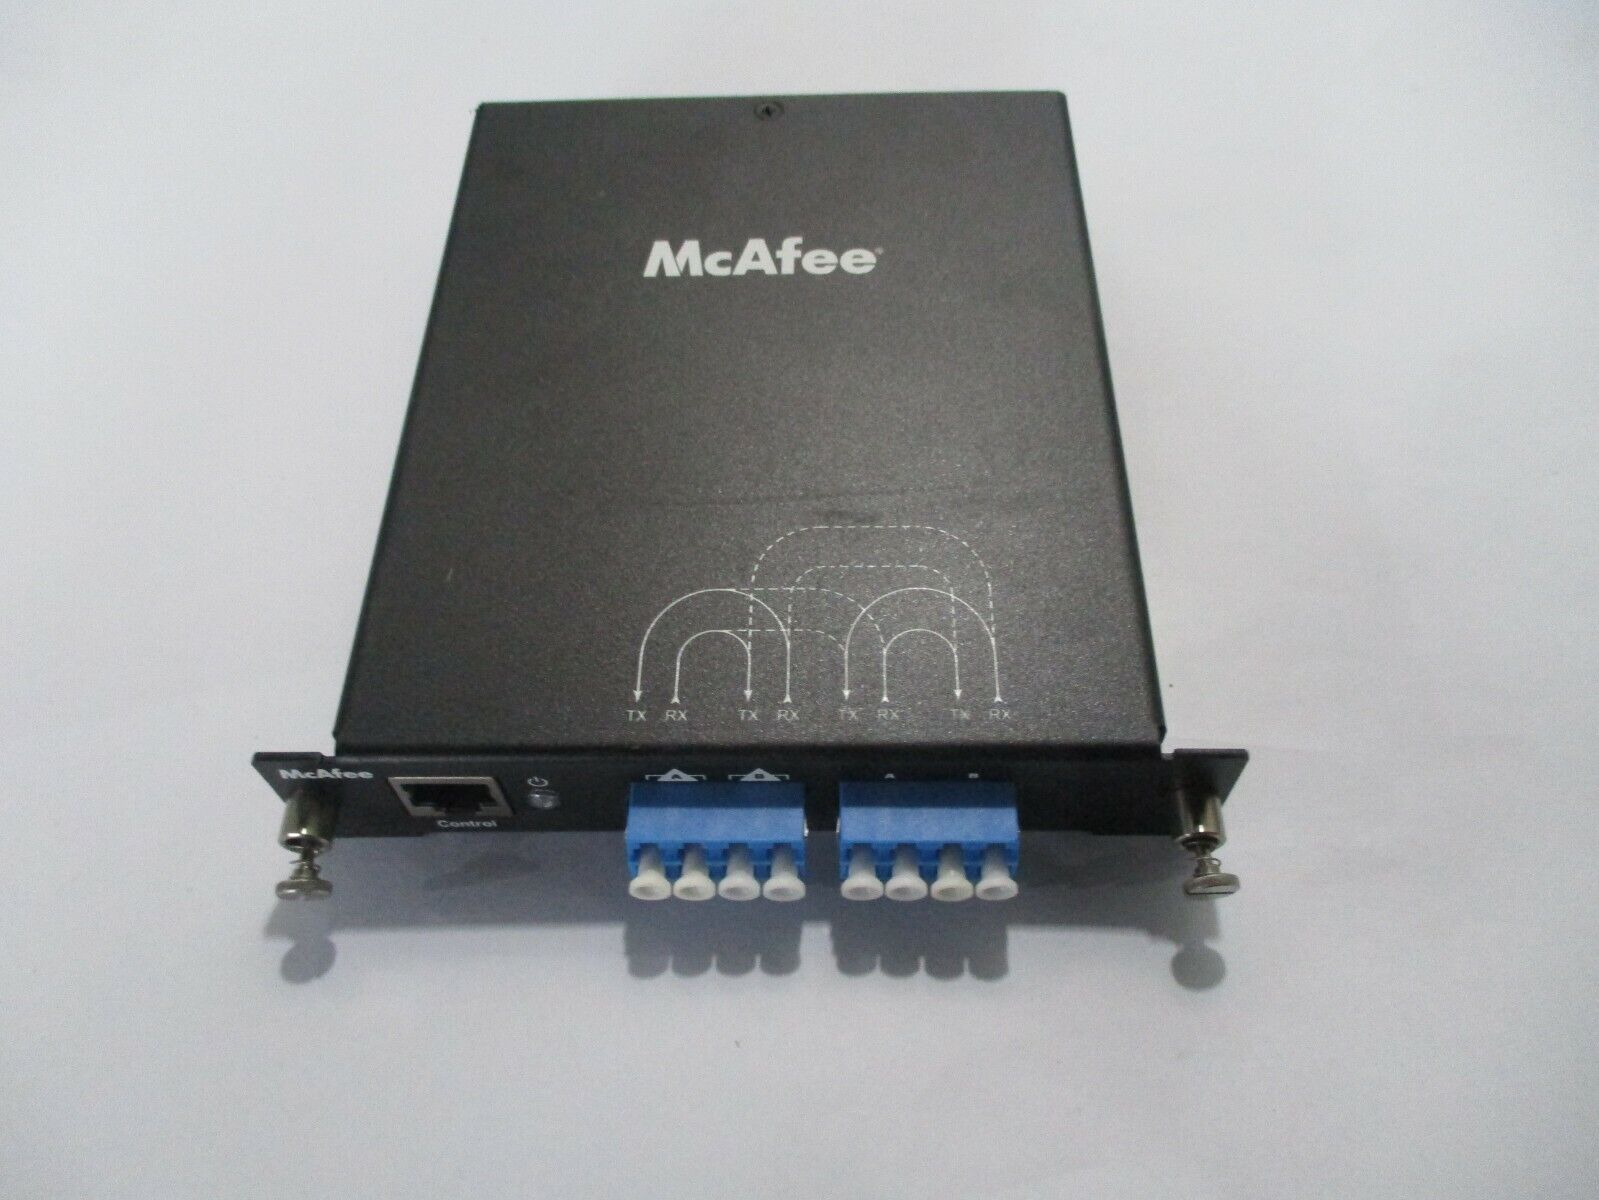  McAfee Control Network Monitor 222-0004-00-G5